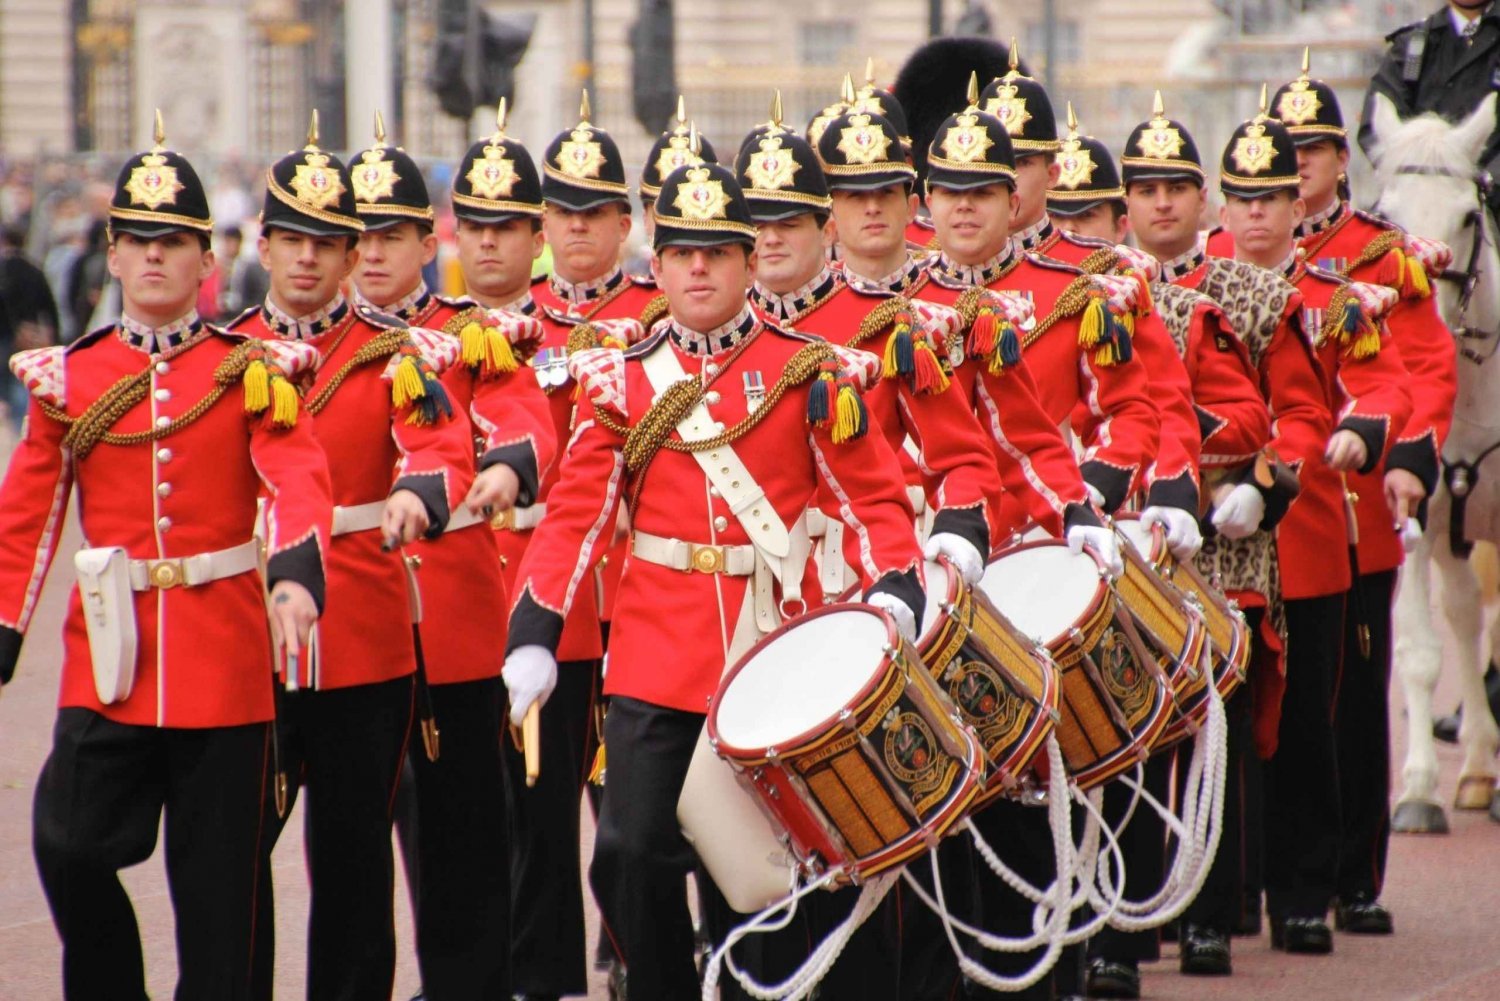 London: The Changing of the Guard Experience